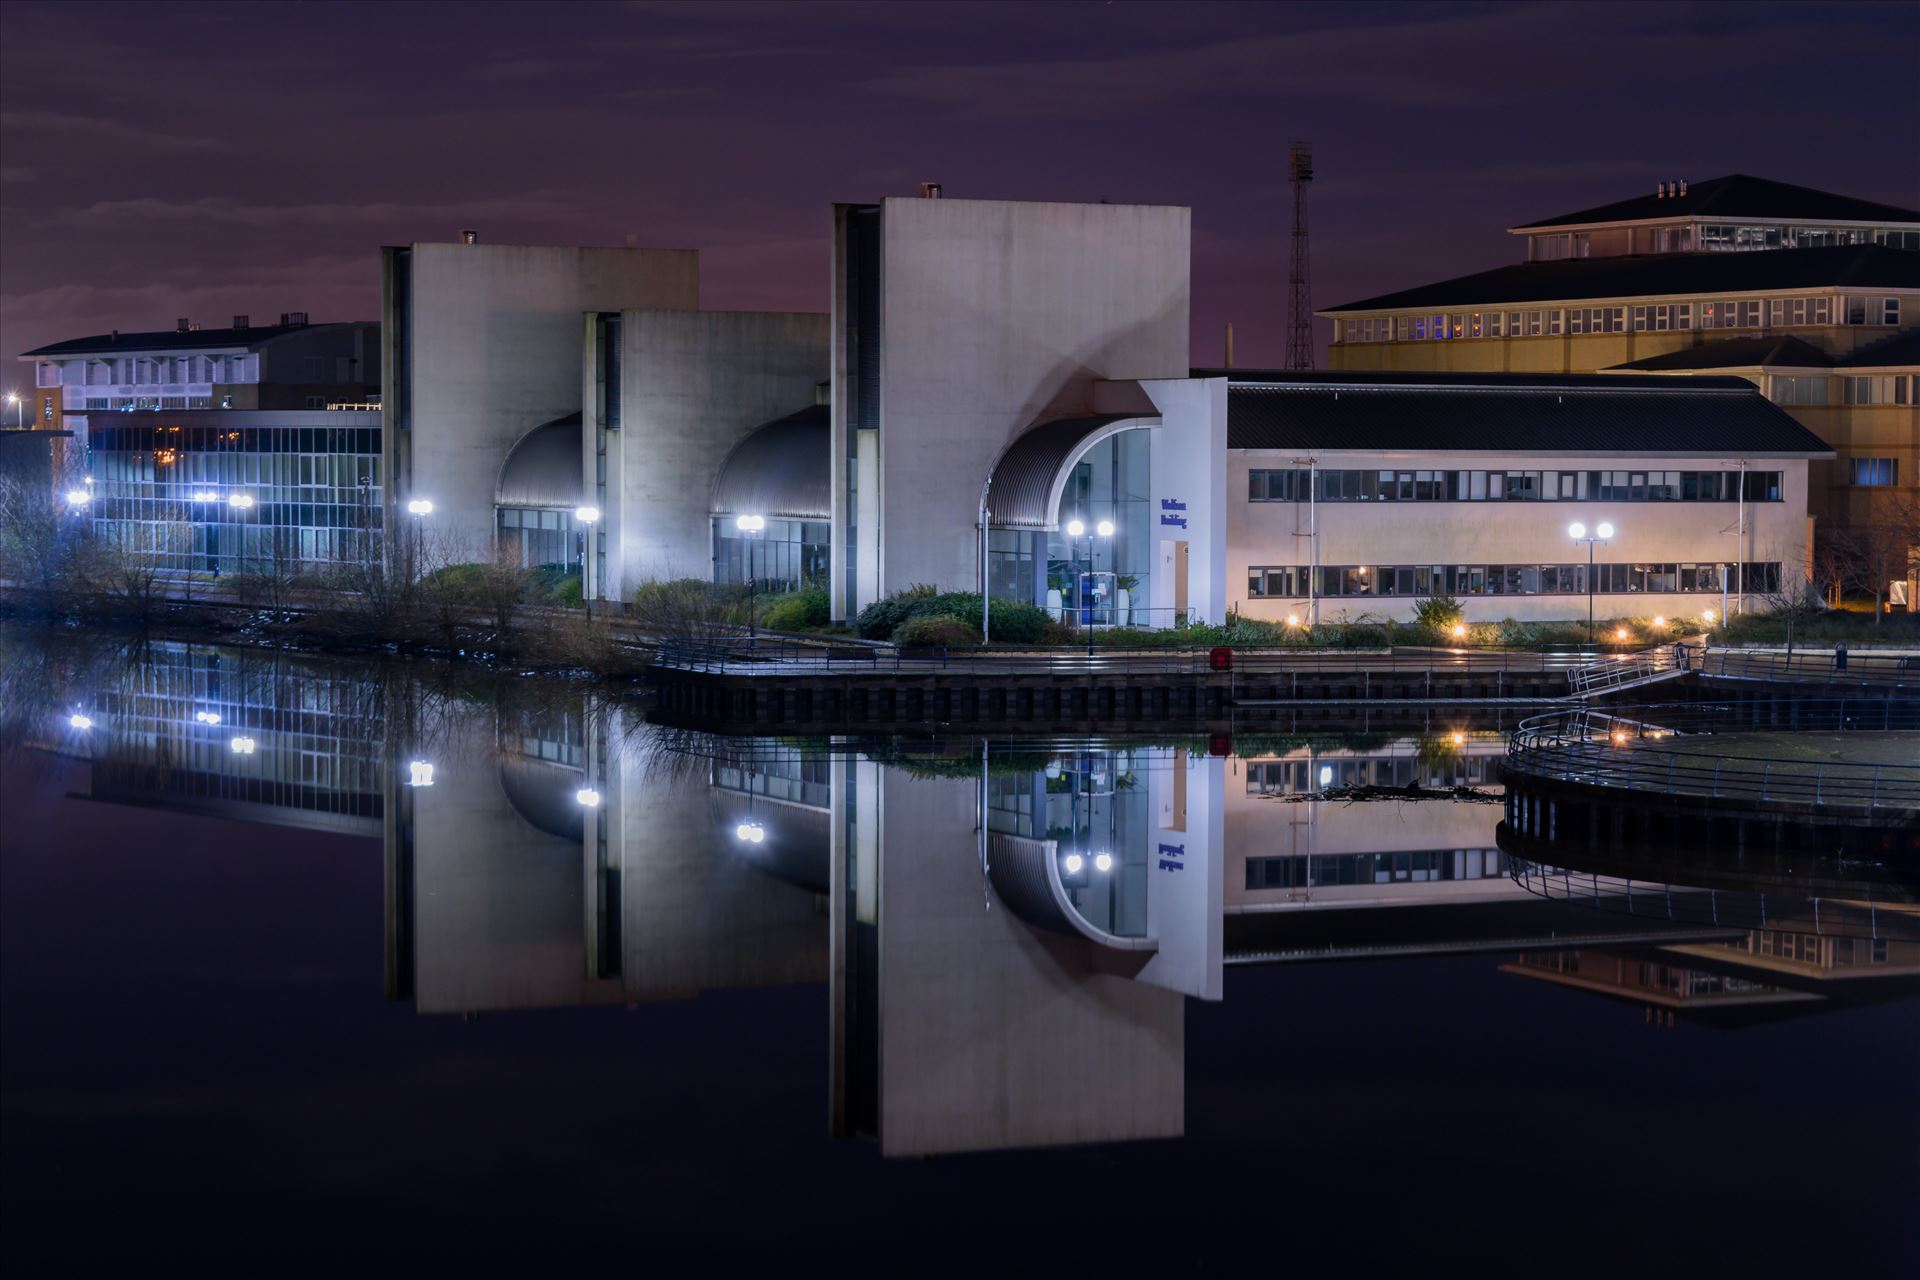 Wolfson Building, Queen\'s Campus, Durham University - Taken on the Infinity Bridge on the 1st January 2018, couldn't believe how flat and still the water was this night by AJ Stoves Photography